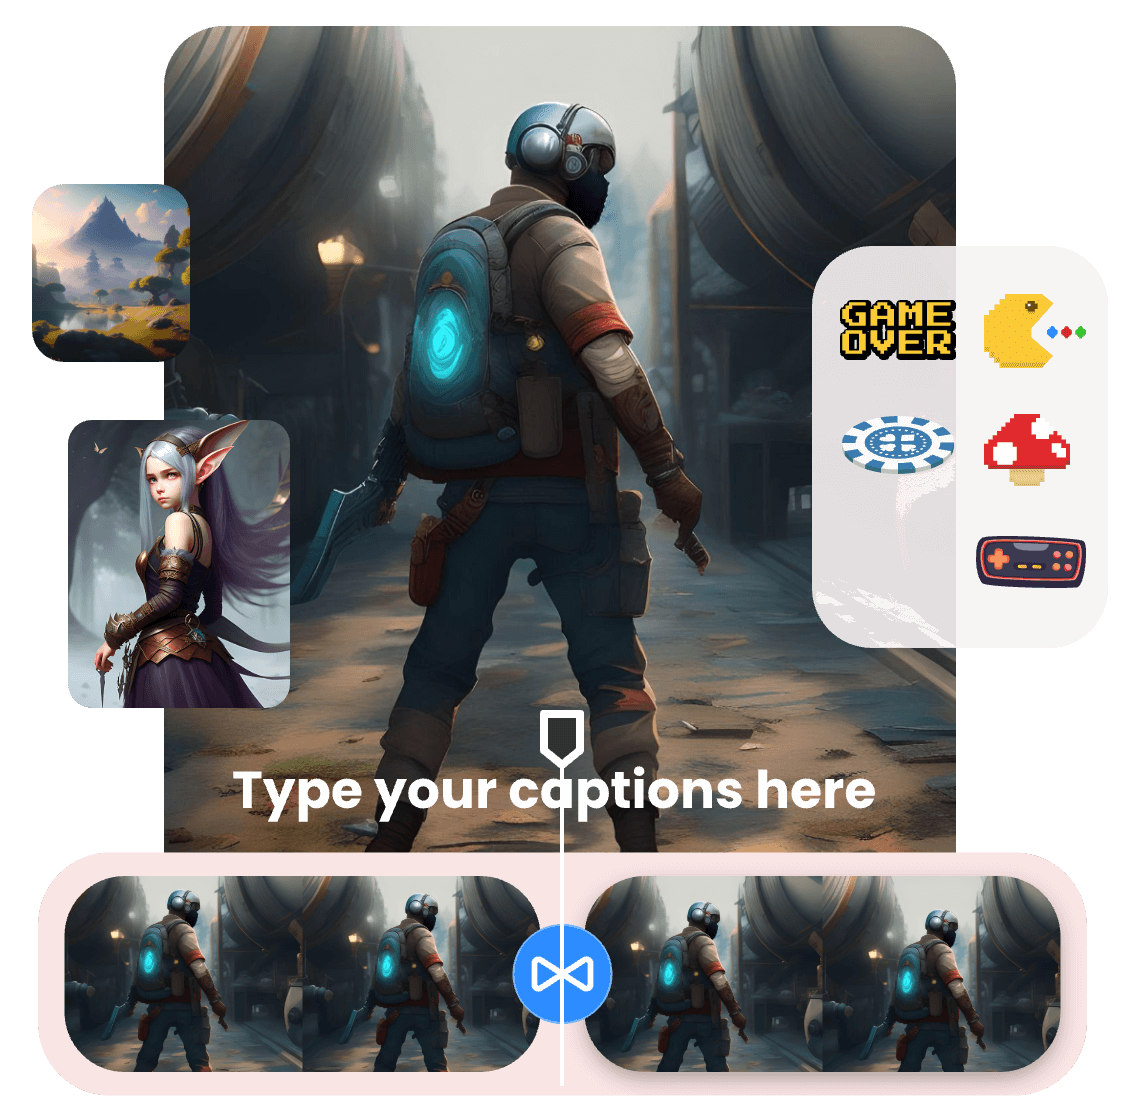 enhance a gaming video with images, text, stickers, and transitions in Clipfly's gaming video editor